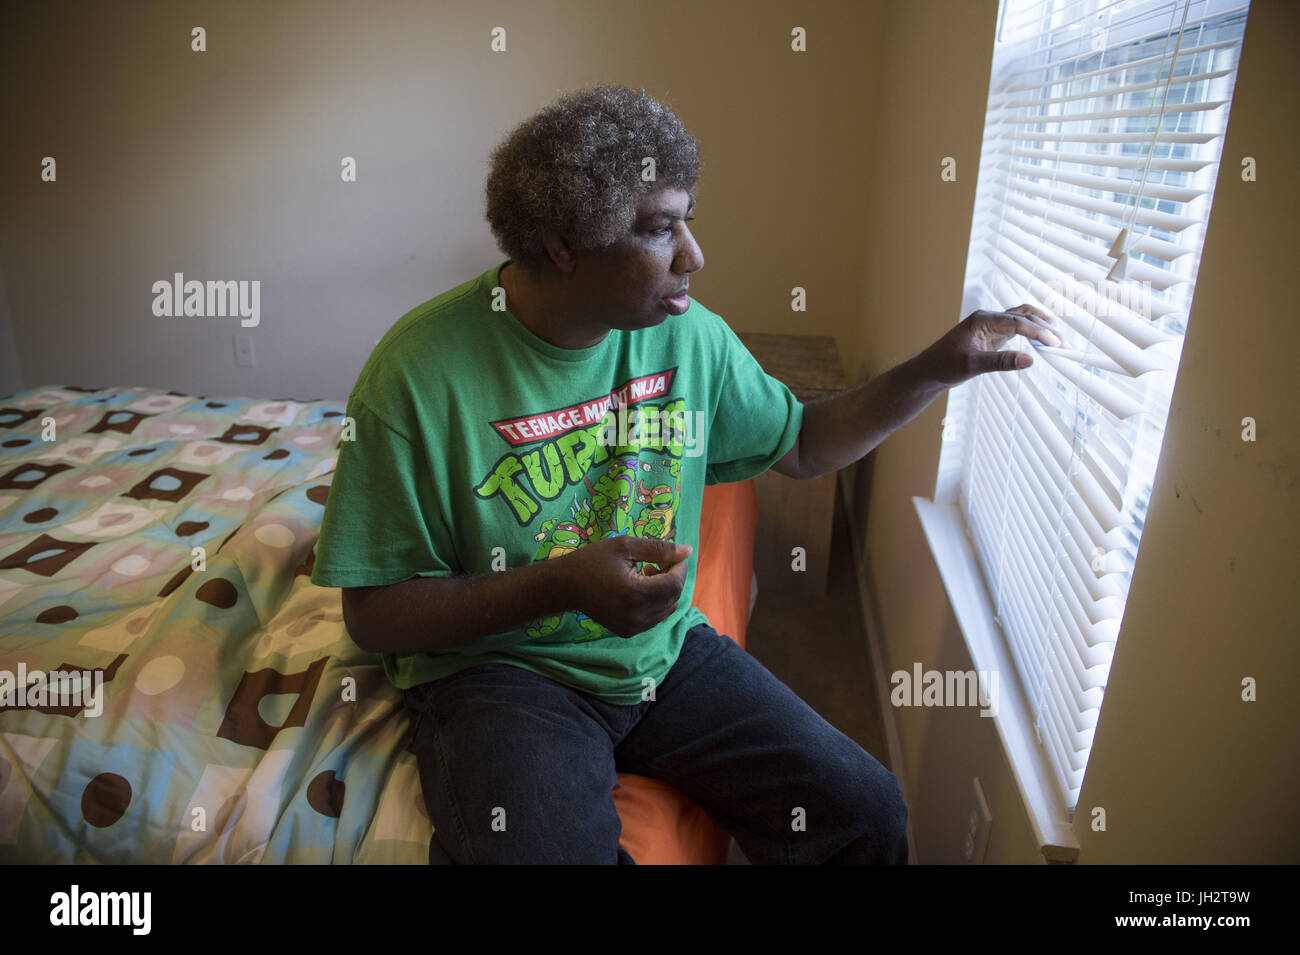 Athens, Georgia, USA. 13th Oct, 2014. PERRY HENDRICKS gazes out window from his private bedroom at his duplex apartment. He is supported by staff from the Georgia Options non-profit organization that helps individuals with developmental disabilities live independently, with funding from their Medicaid waivers. Perry lived in state institutions for decades before transitioning to his own home. Credit: Robin Rayne Nelson/zReportage.com/ZUMA Wire/Alamy Live News Stock Photo